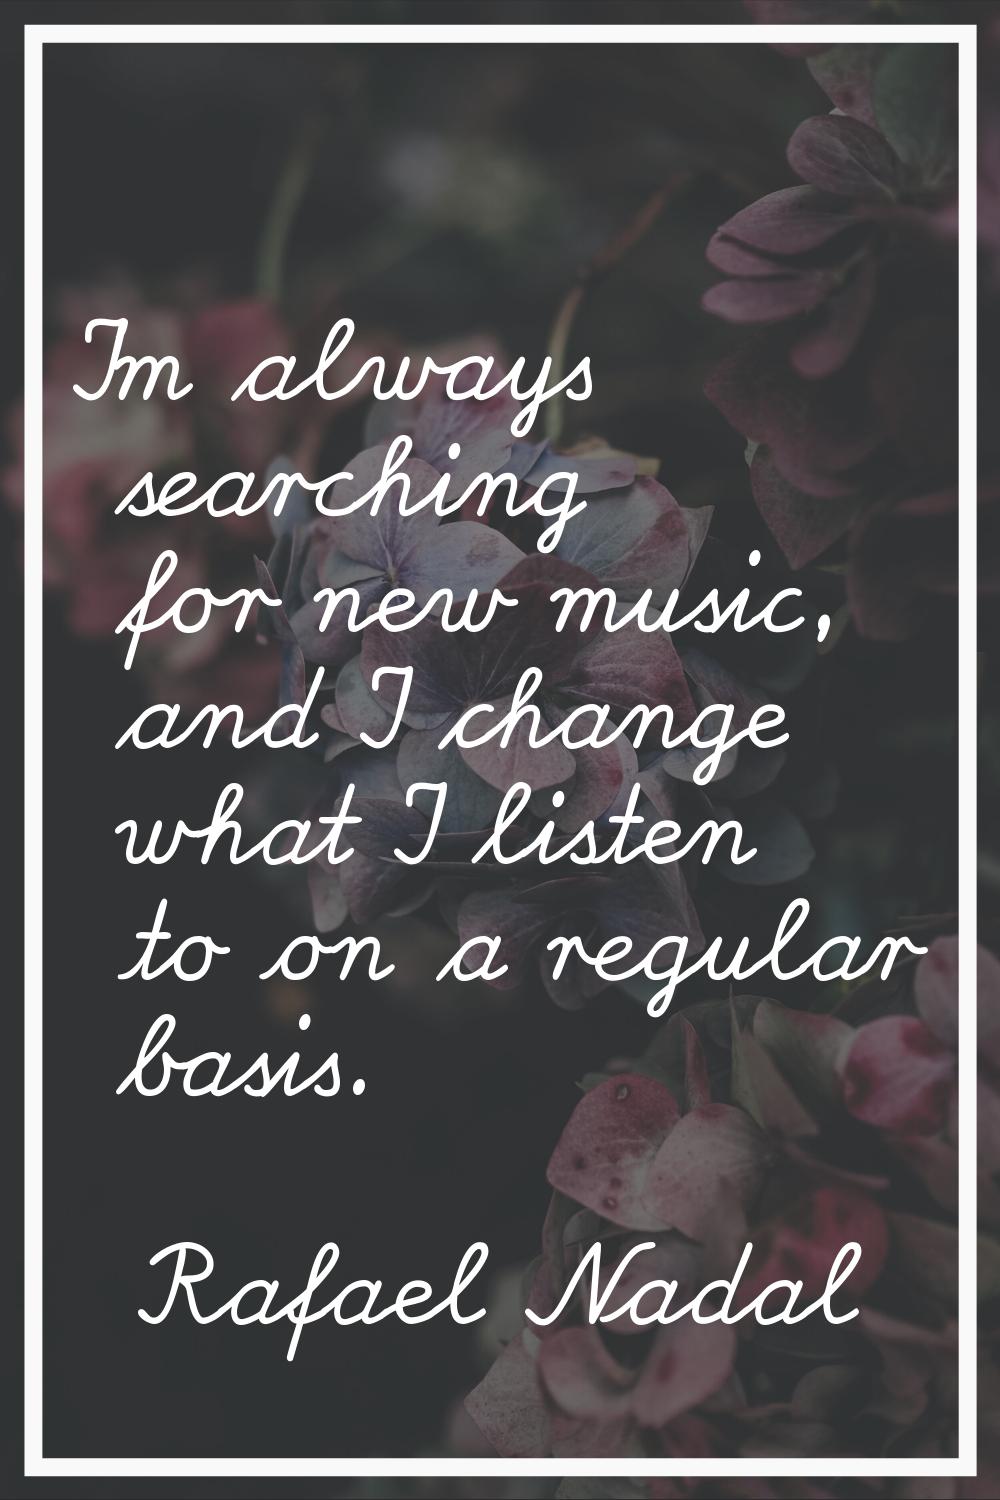 I'm always searching for new music, and I change what I listen to on a regular basis.